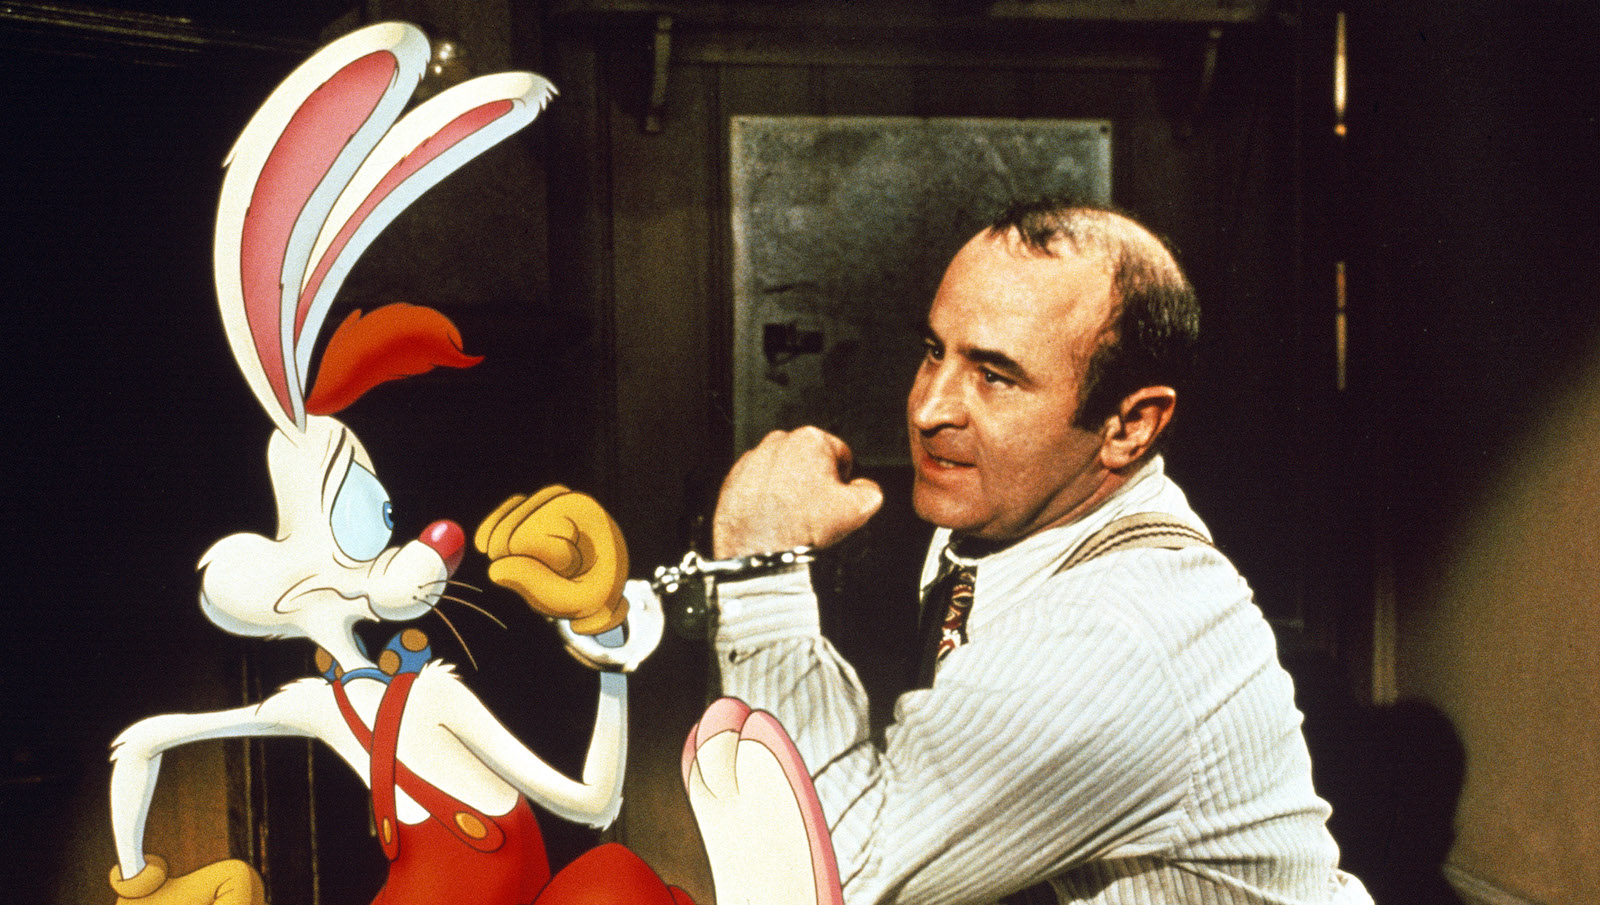 A man and an animated rabbit handcuffed together